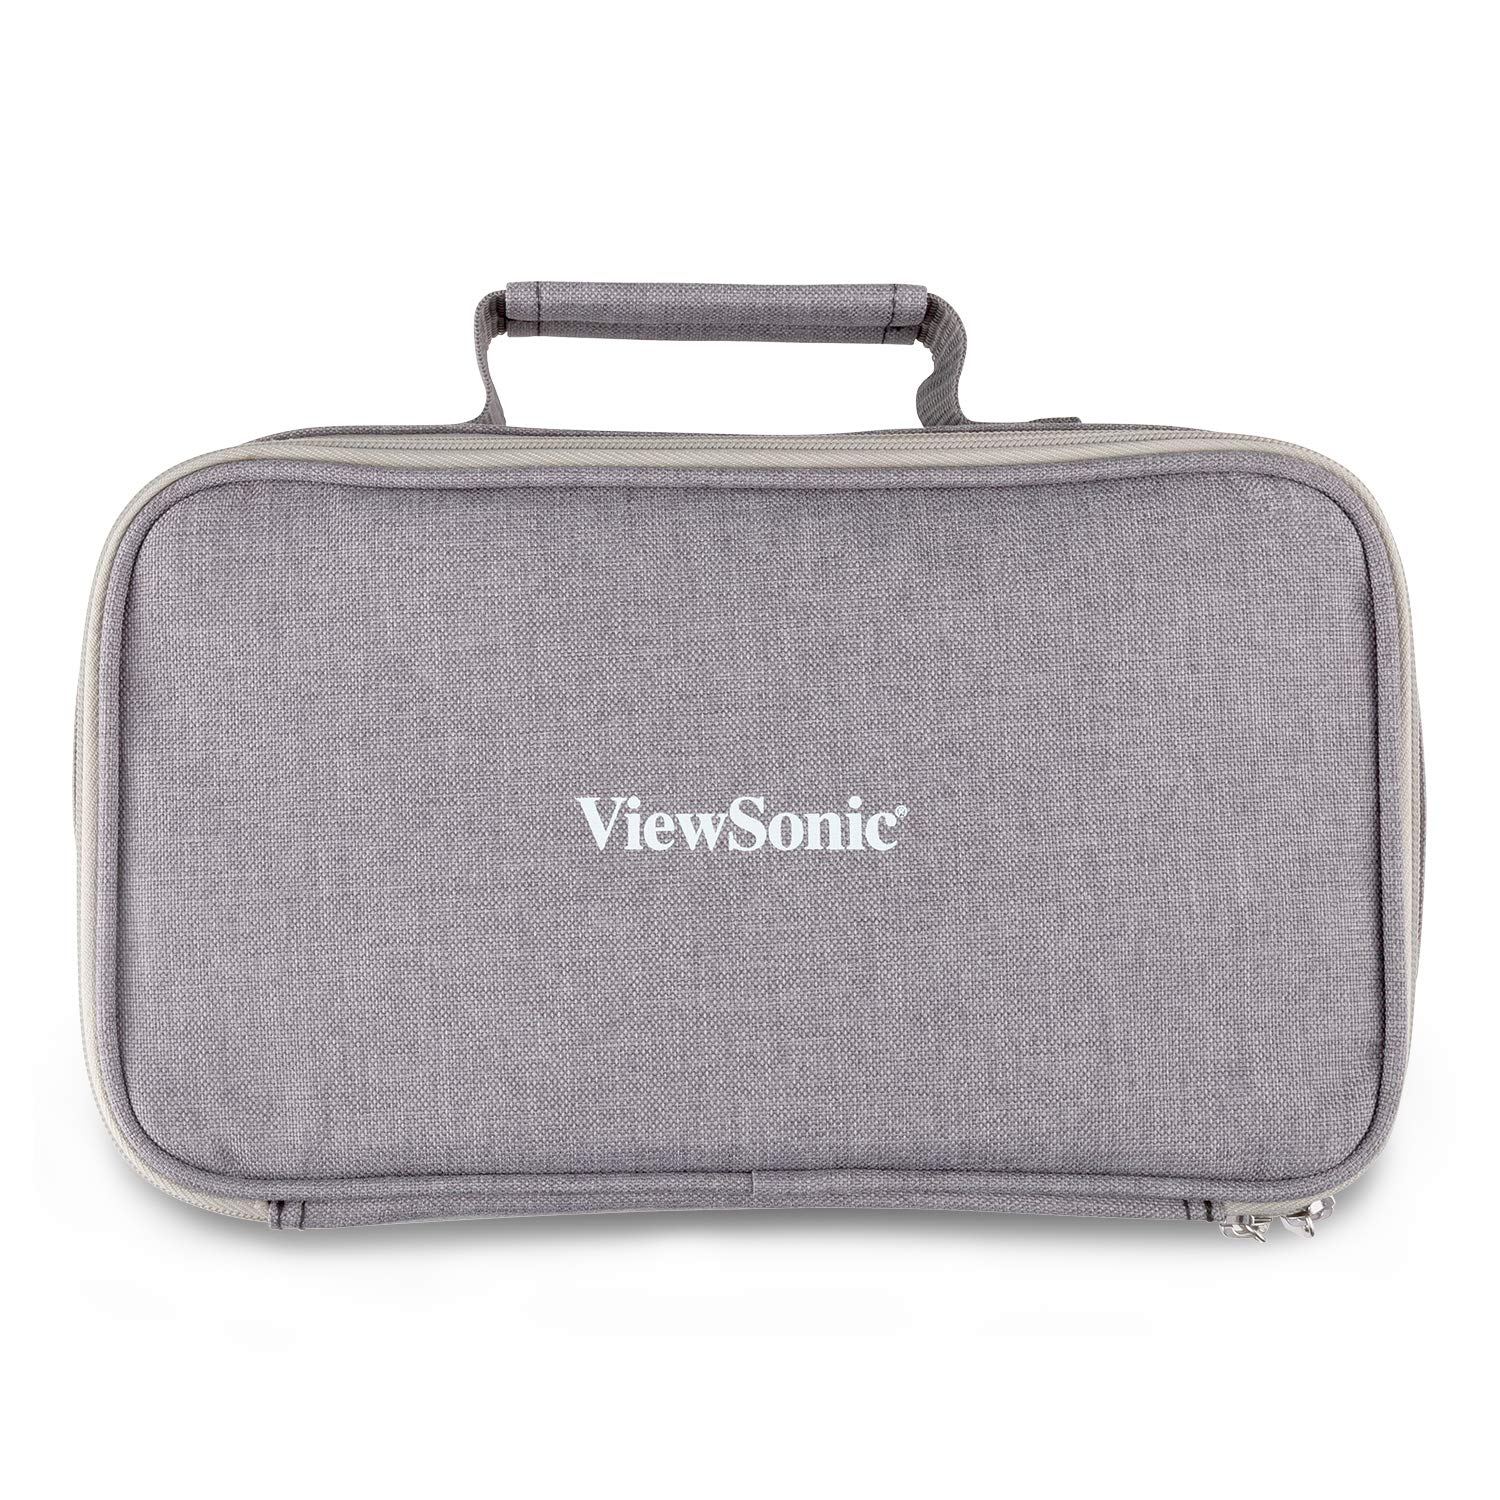 ViewSonic PJ-CASE-010 Zipped Soft Padded Carrying Case for M1 Projector Gray